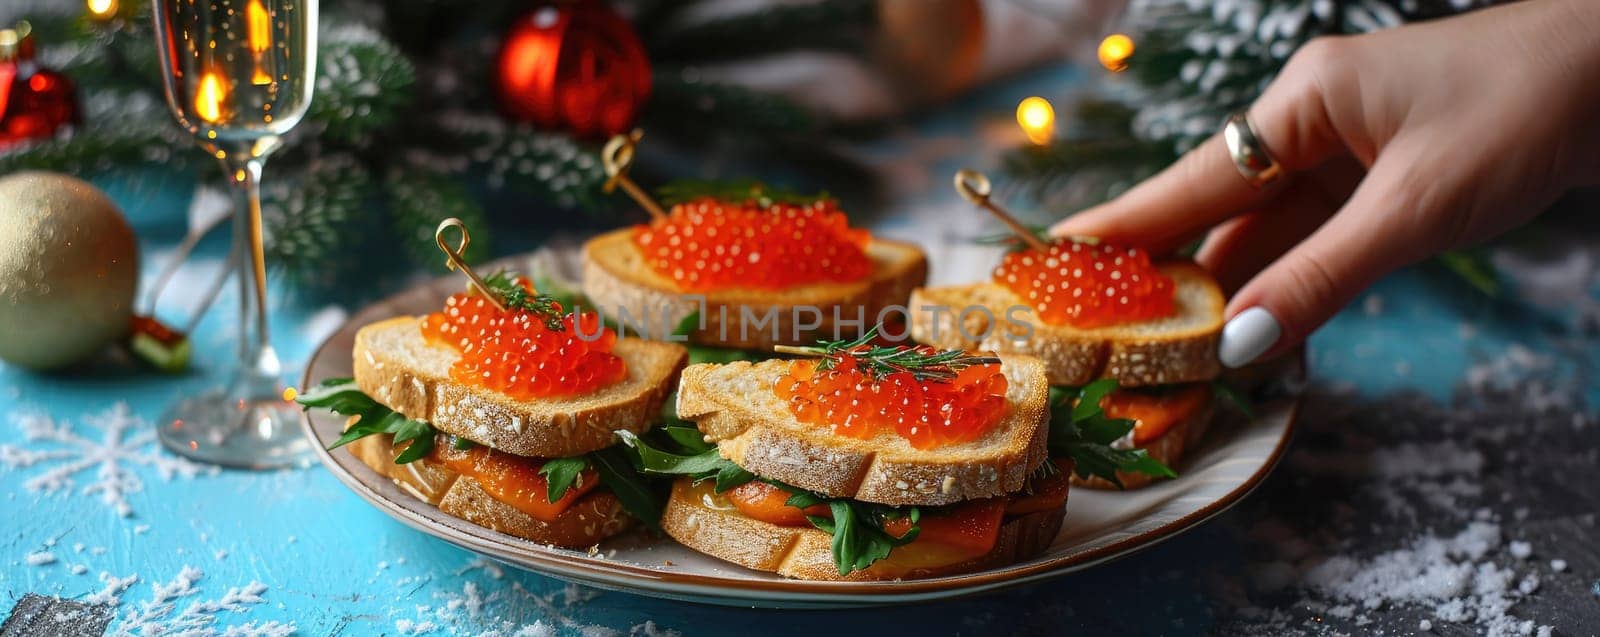 Sandwich with red caviar in a woman's hand on a festive background by Yurich32